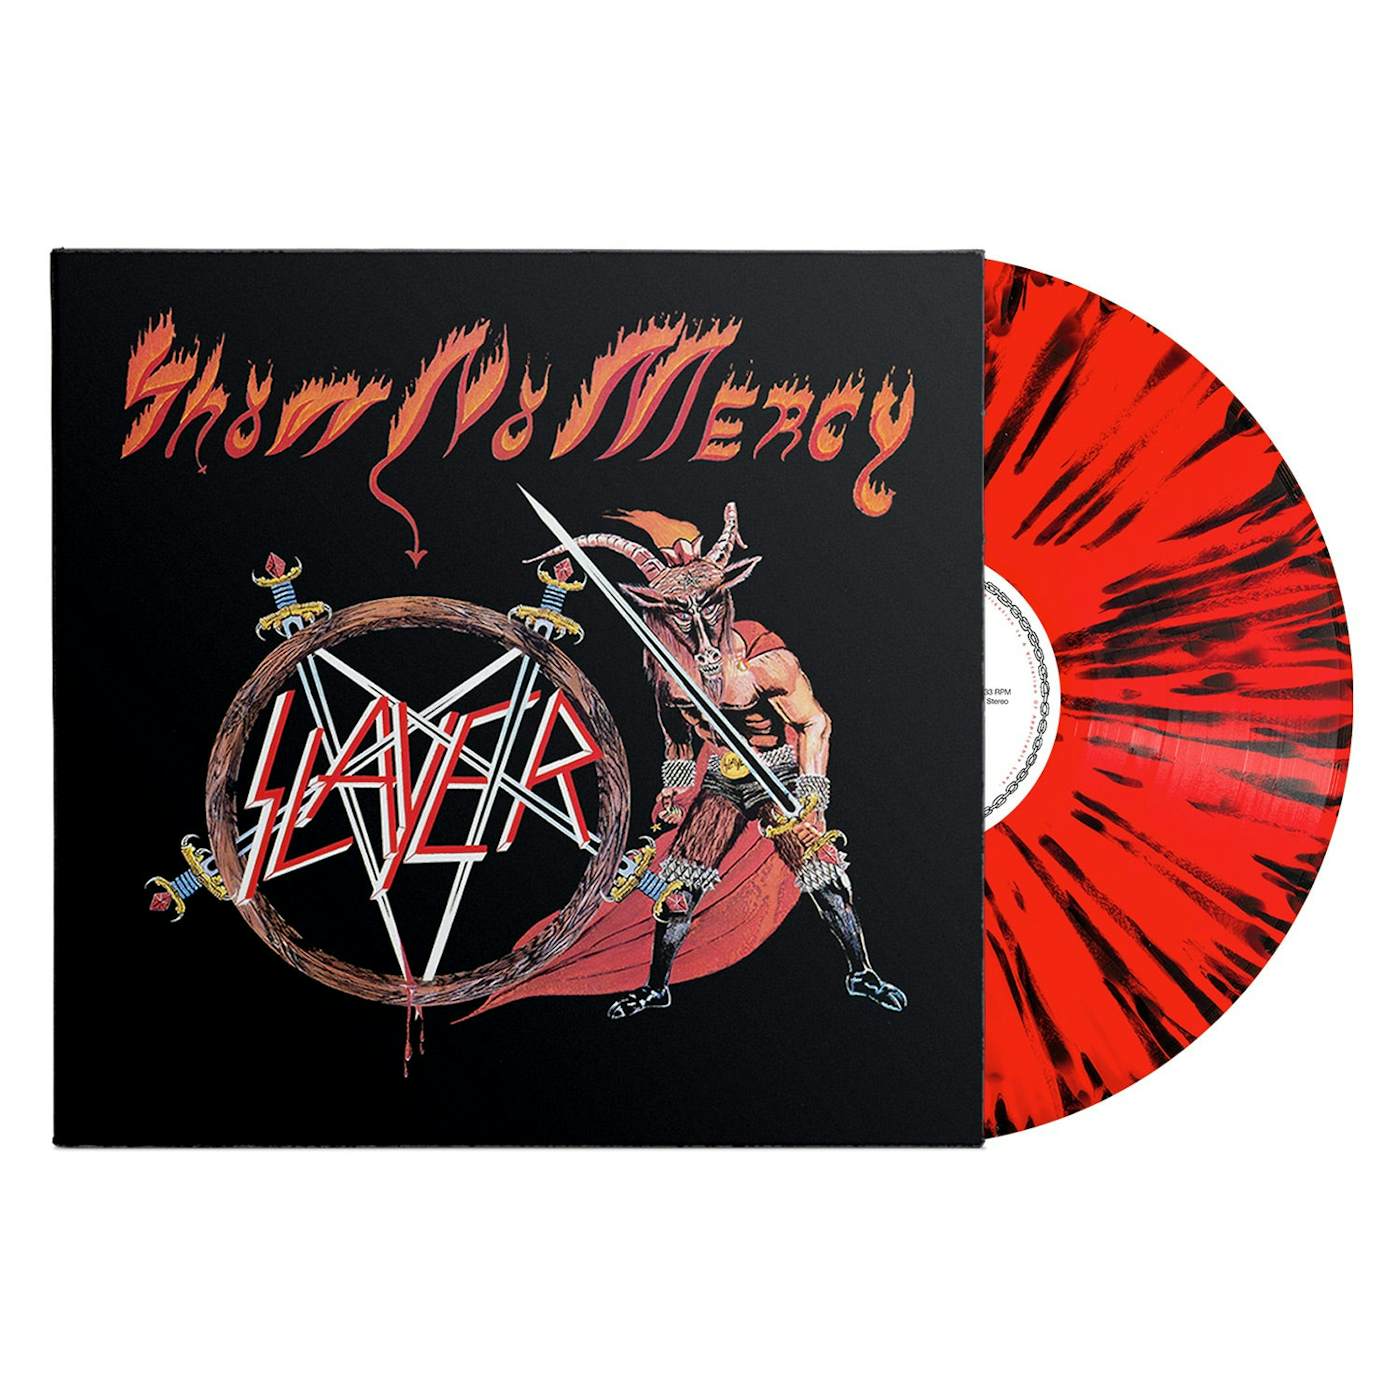 Gripsweat - Slayer: Repentless - Limited Edition 6.66 Gold Color